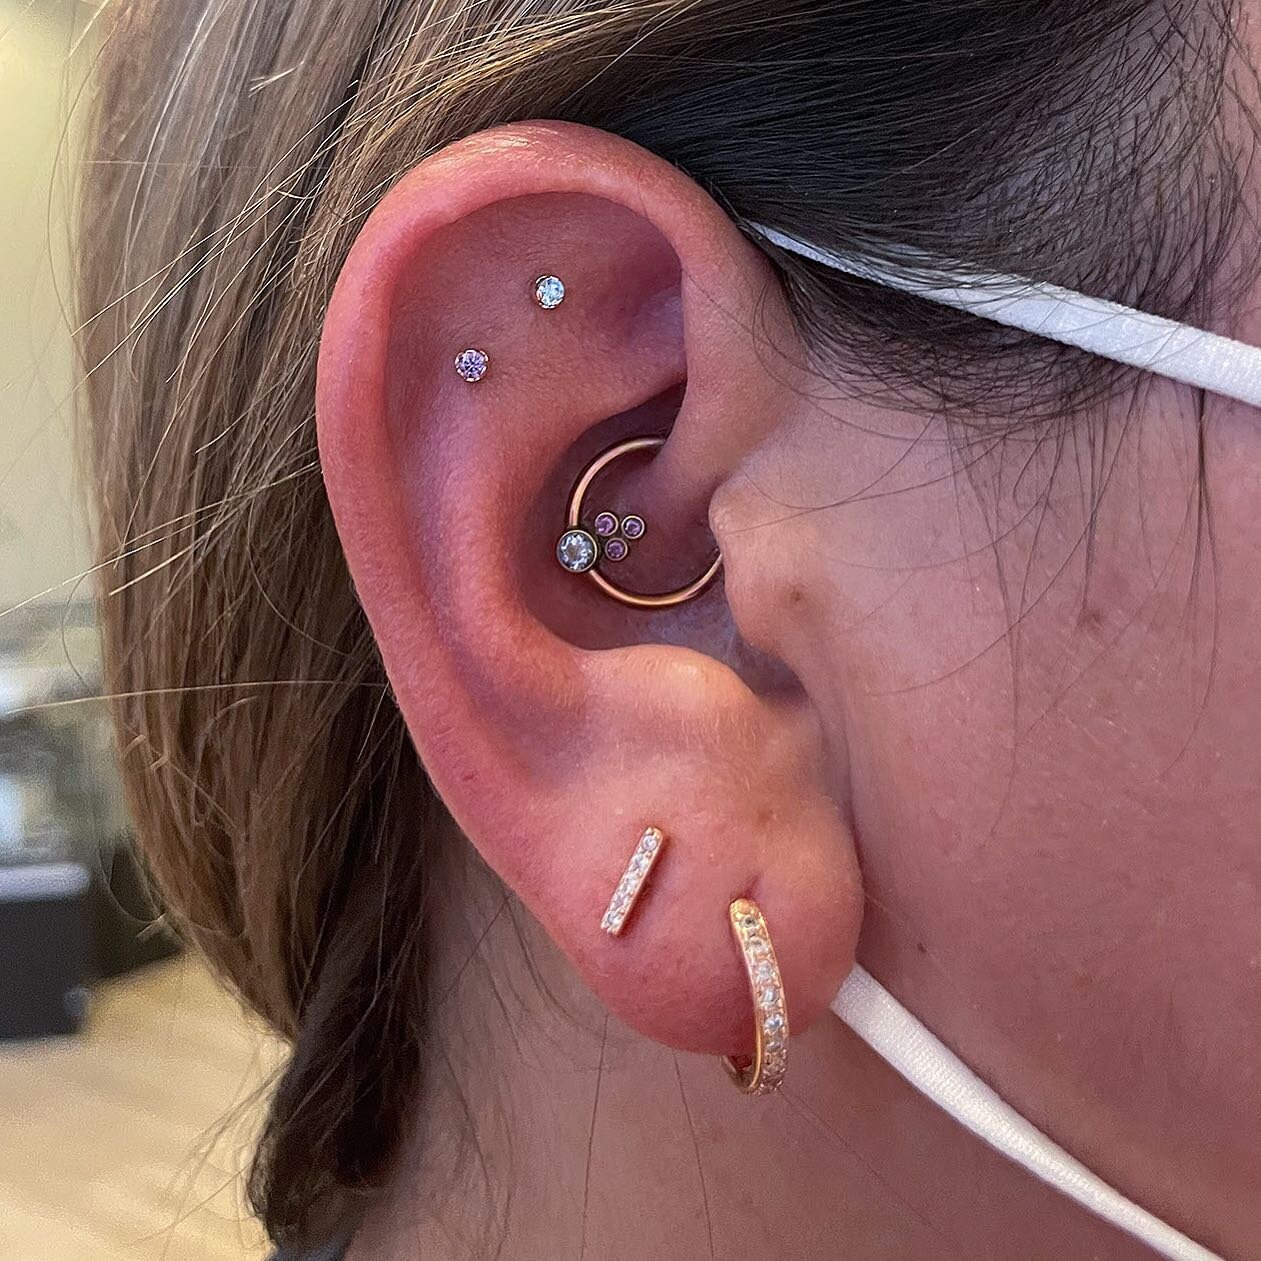 I&rsquo;m a sucker for a good color scheme and Ashley knocked it out of the park here&mdash;choosing arctic blue and amethyst pieces for her double flat that perfectly complement the periwinkle and lilac in her daith piece. Both studs and daith are f